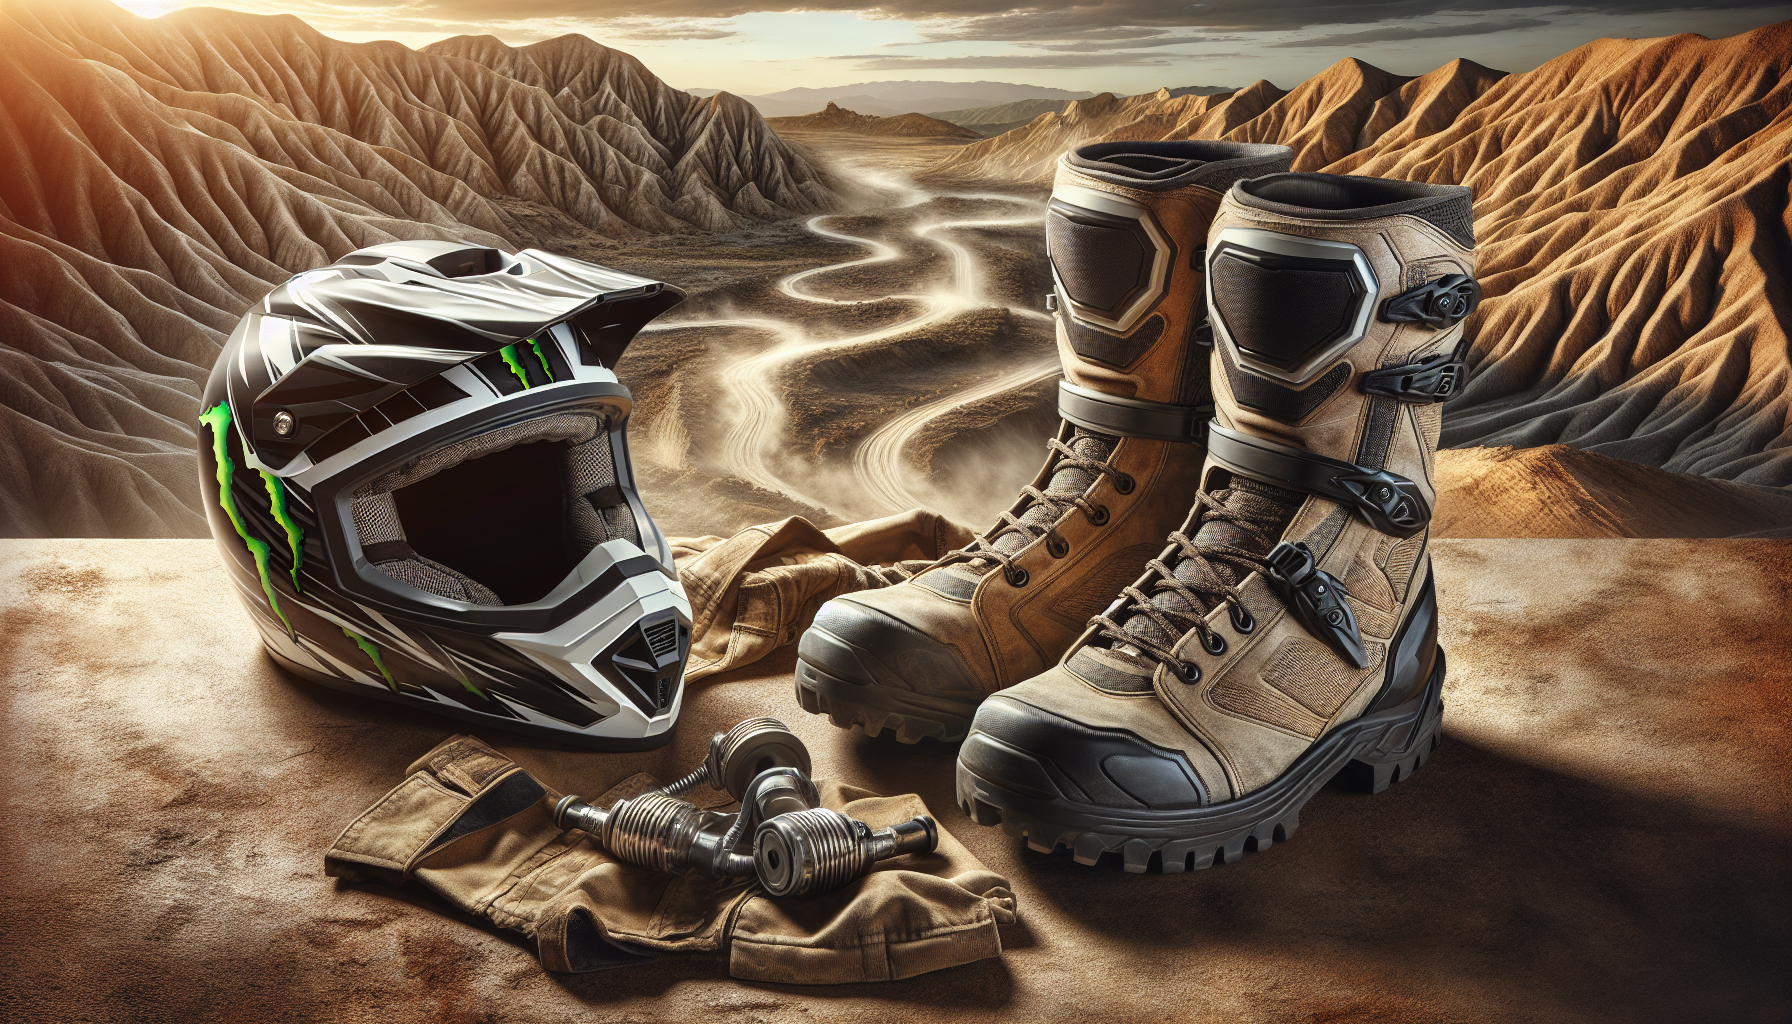 The Ultimate Guide to Dirt Bike Gear Everything You Need to Know